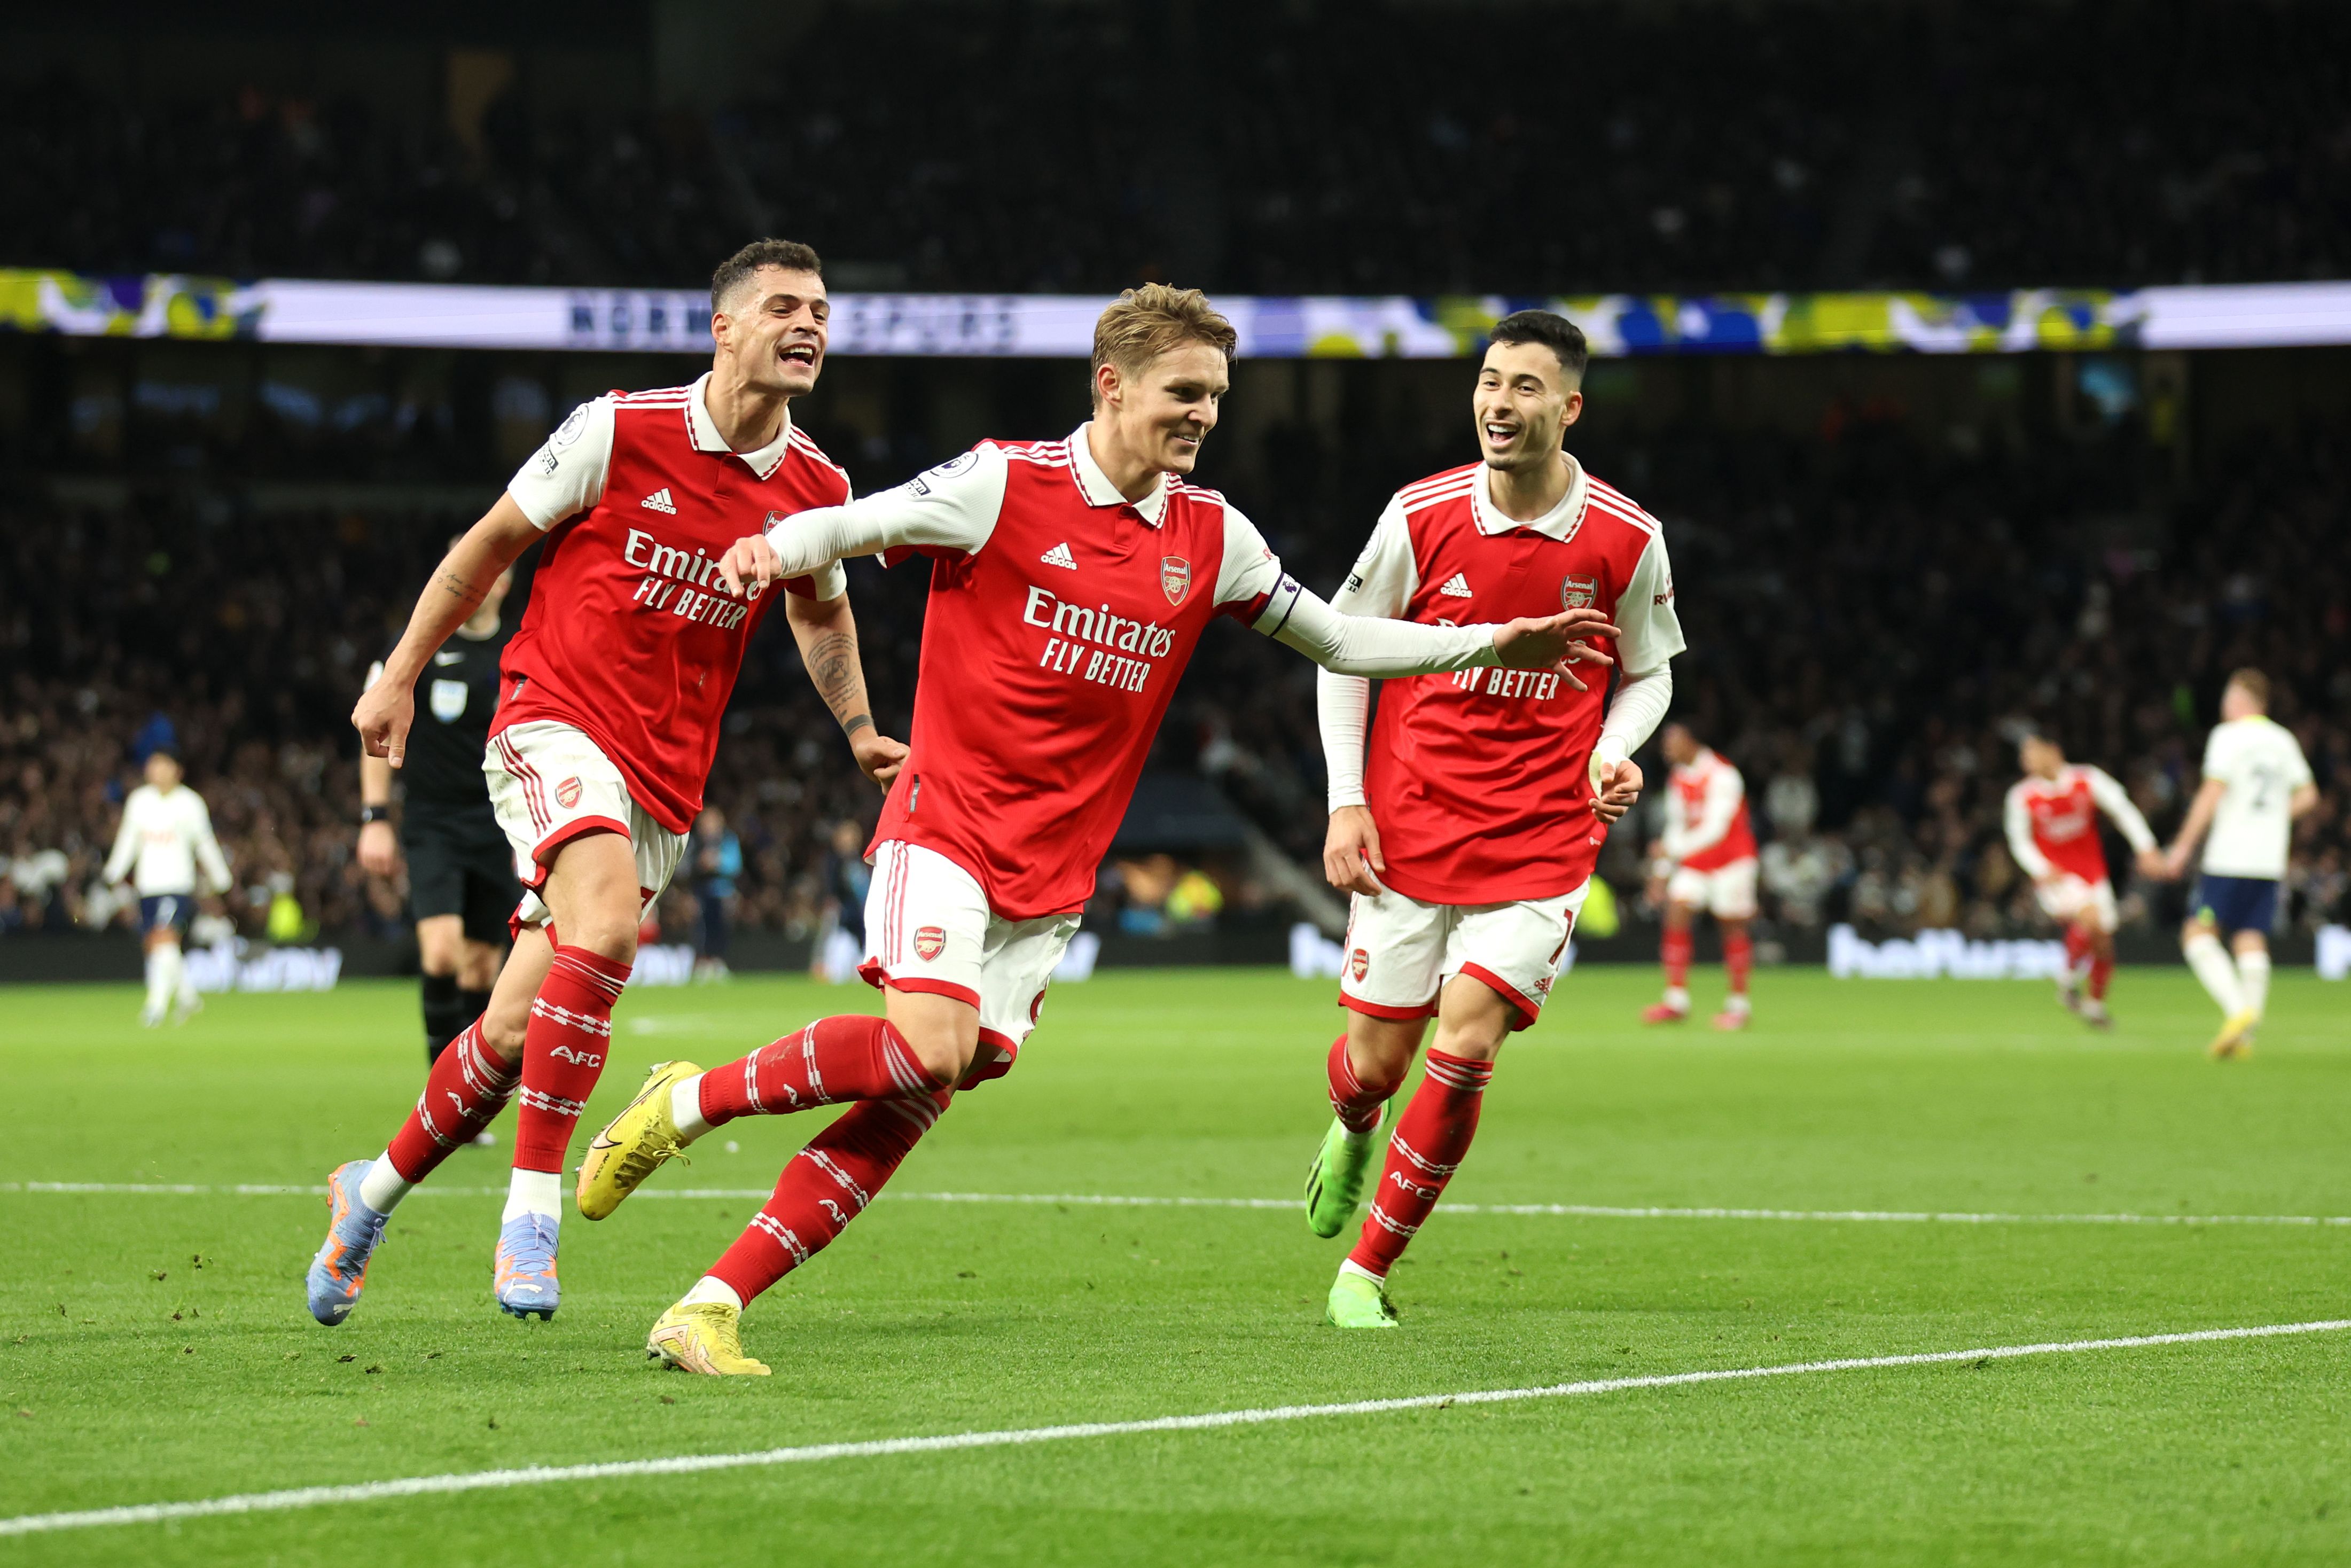 Martin Odegaard of Arsenal celebrates after scoring the team's second goal during the Premier League match between Tottenham Hotspur and Arsenal FC at Tottenham Hotspur Stadium on January 15, 2023 in London, England